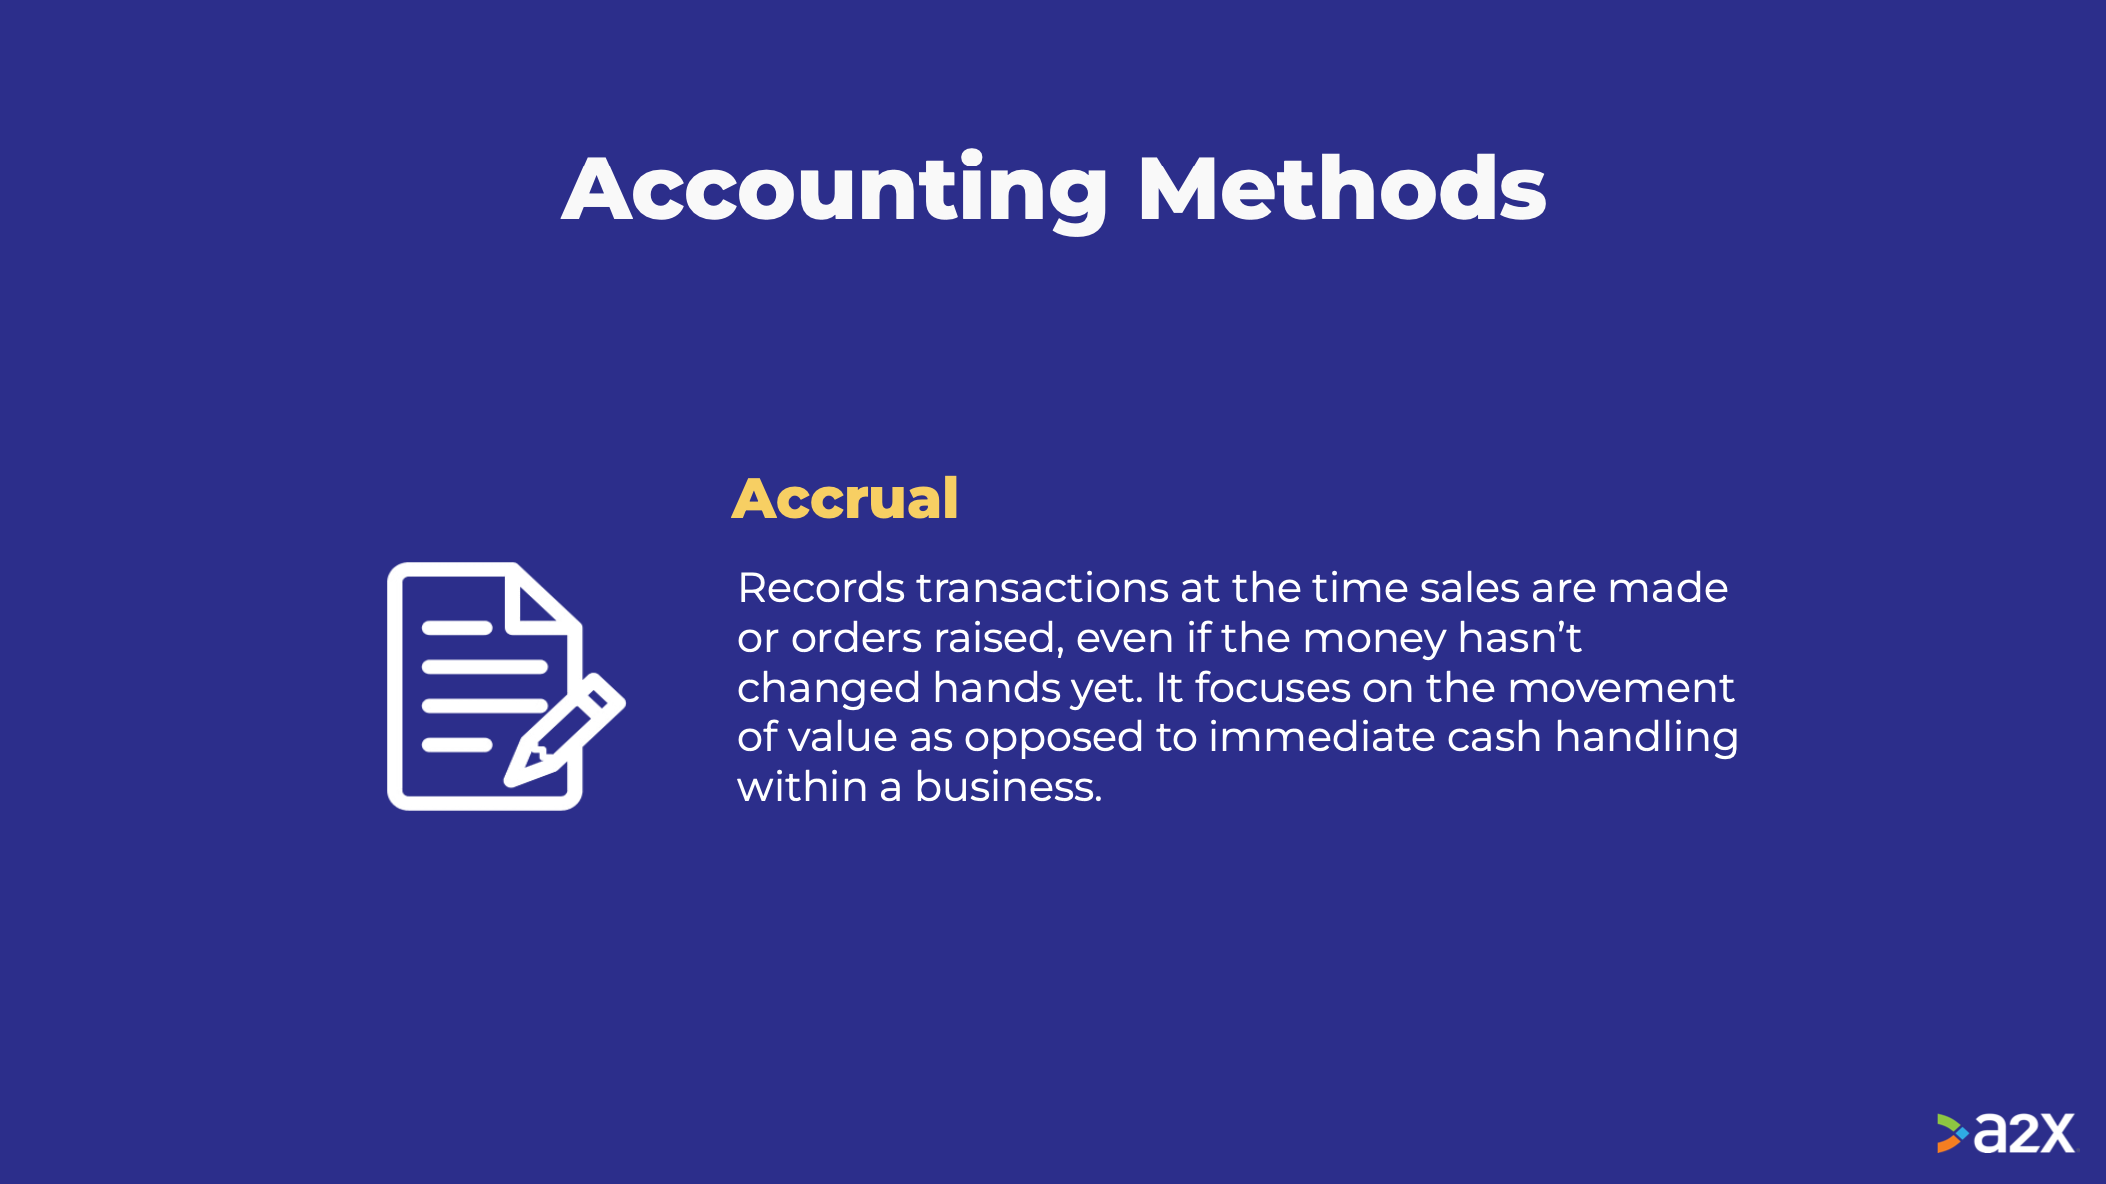 What is Accrual accounting